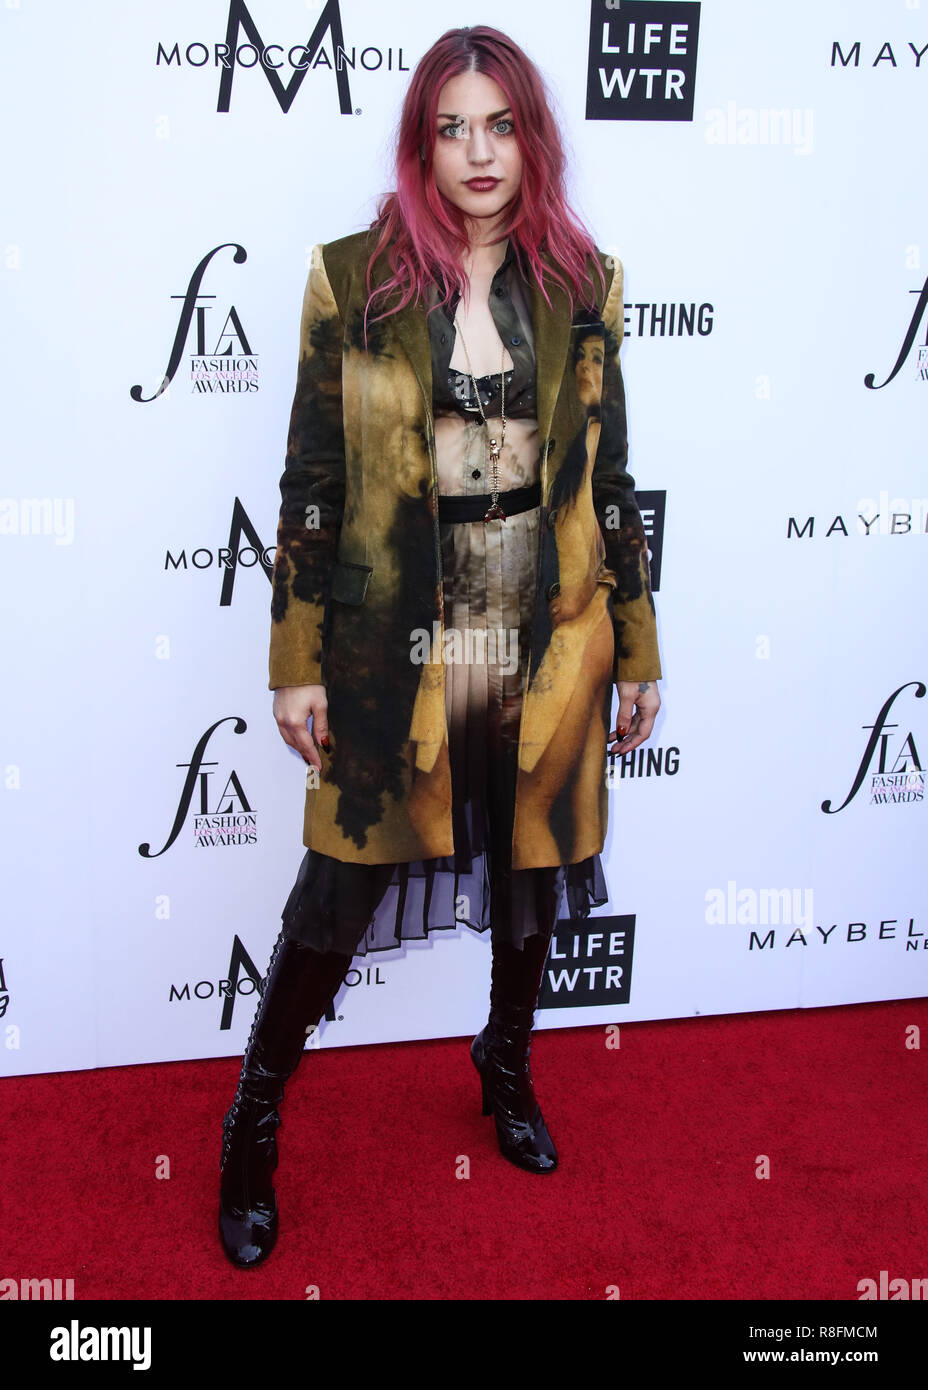 BEVERLY HILLS, LOS ANGELES, CA, USA - APRIL 08: Frances Bean Cobain at The Daily Front Row's 4th Annual Fashion Los Angeles Awards held at the Beverly Hills Hotel on April 8, 2018 in Beverly Hills, Los Angeles, California, United States. (Photo by Xavier Collin/Image Press Agency) Stock Photo